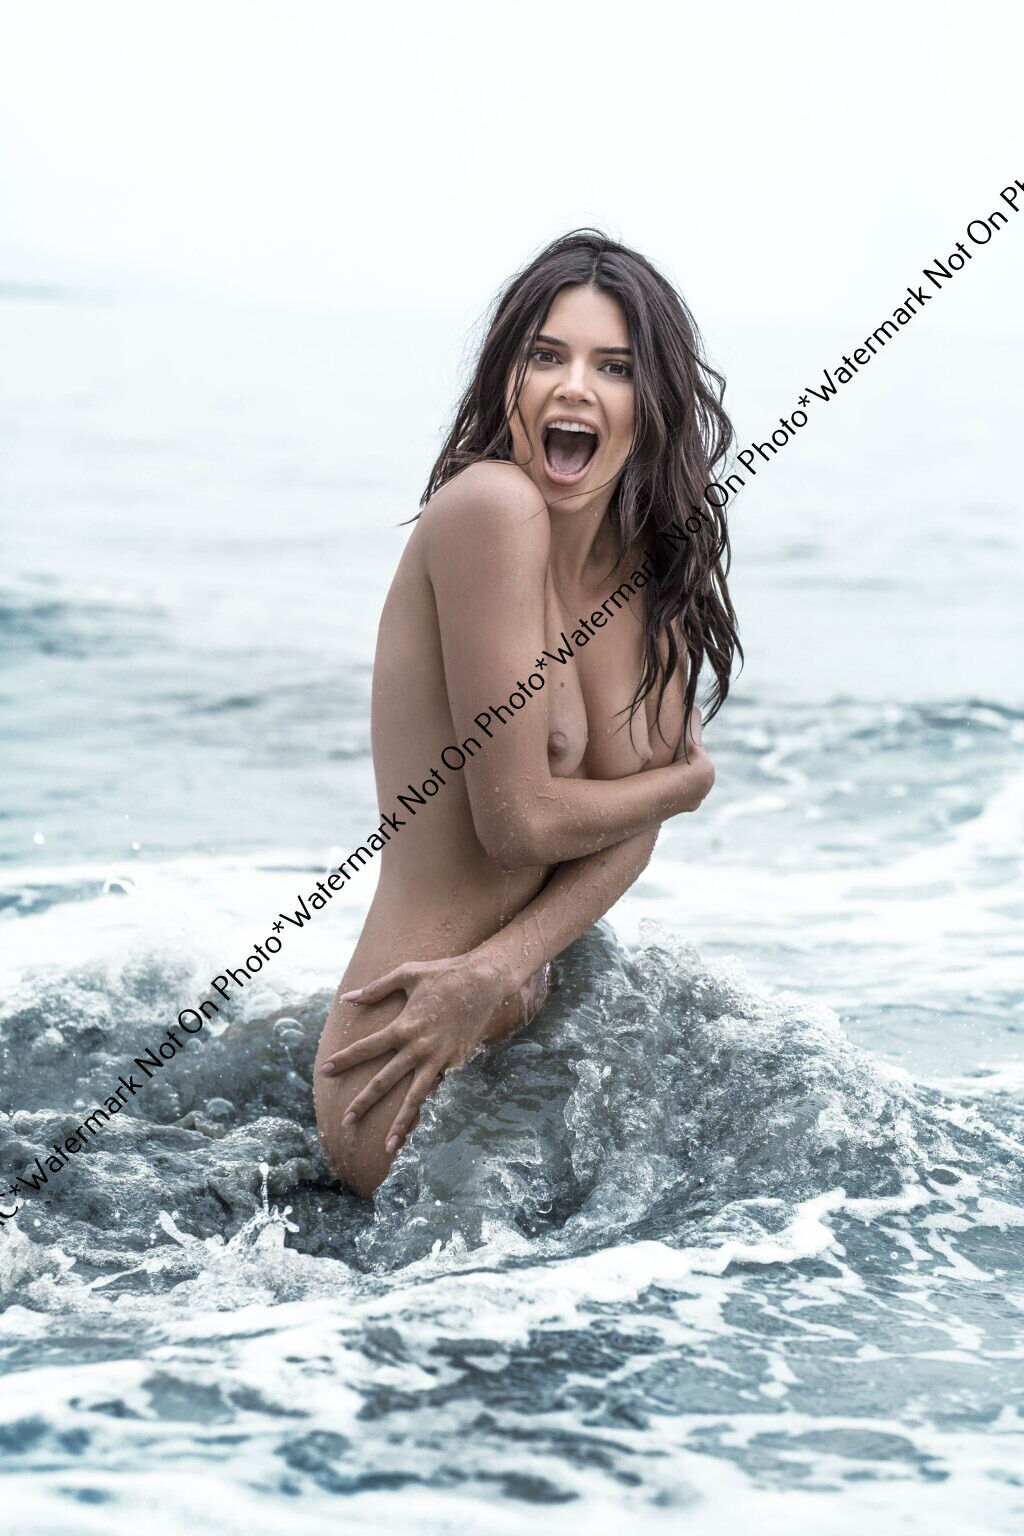 ariel aviles recommends kendall jenner topless pic